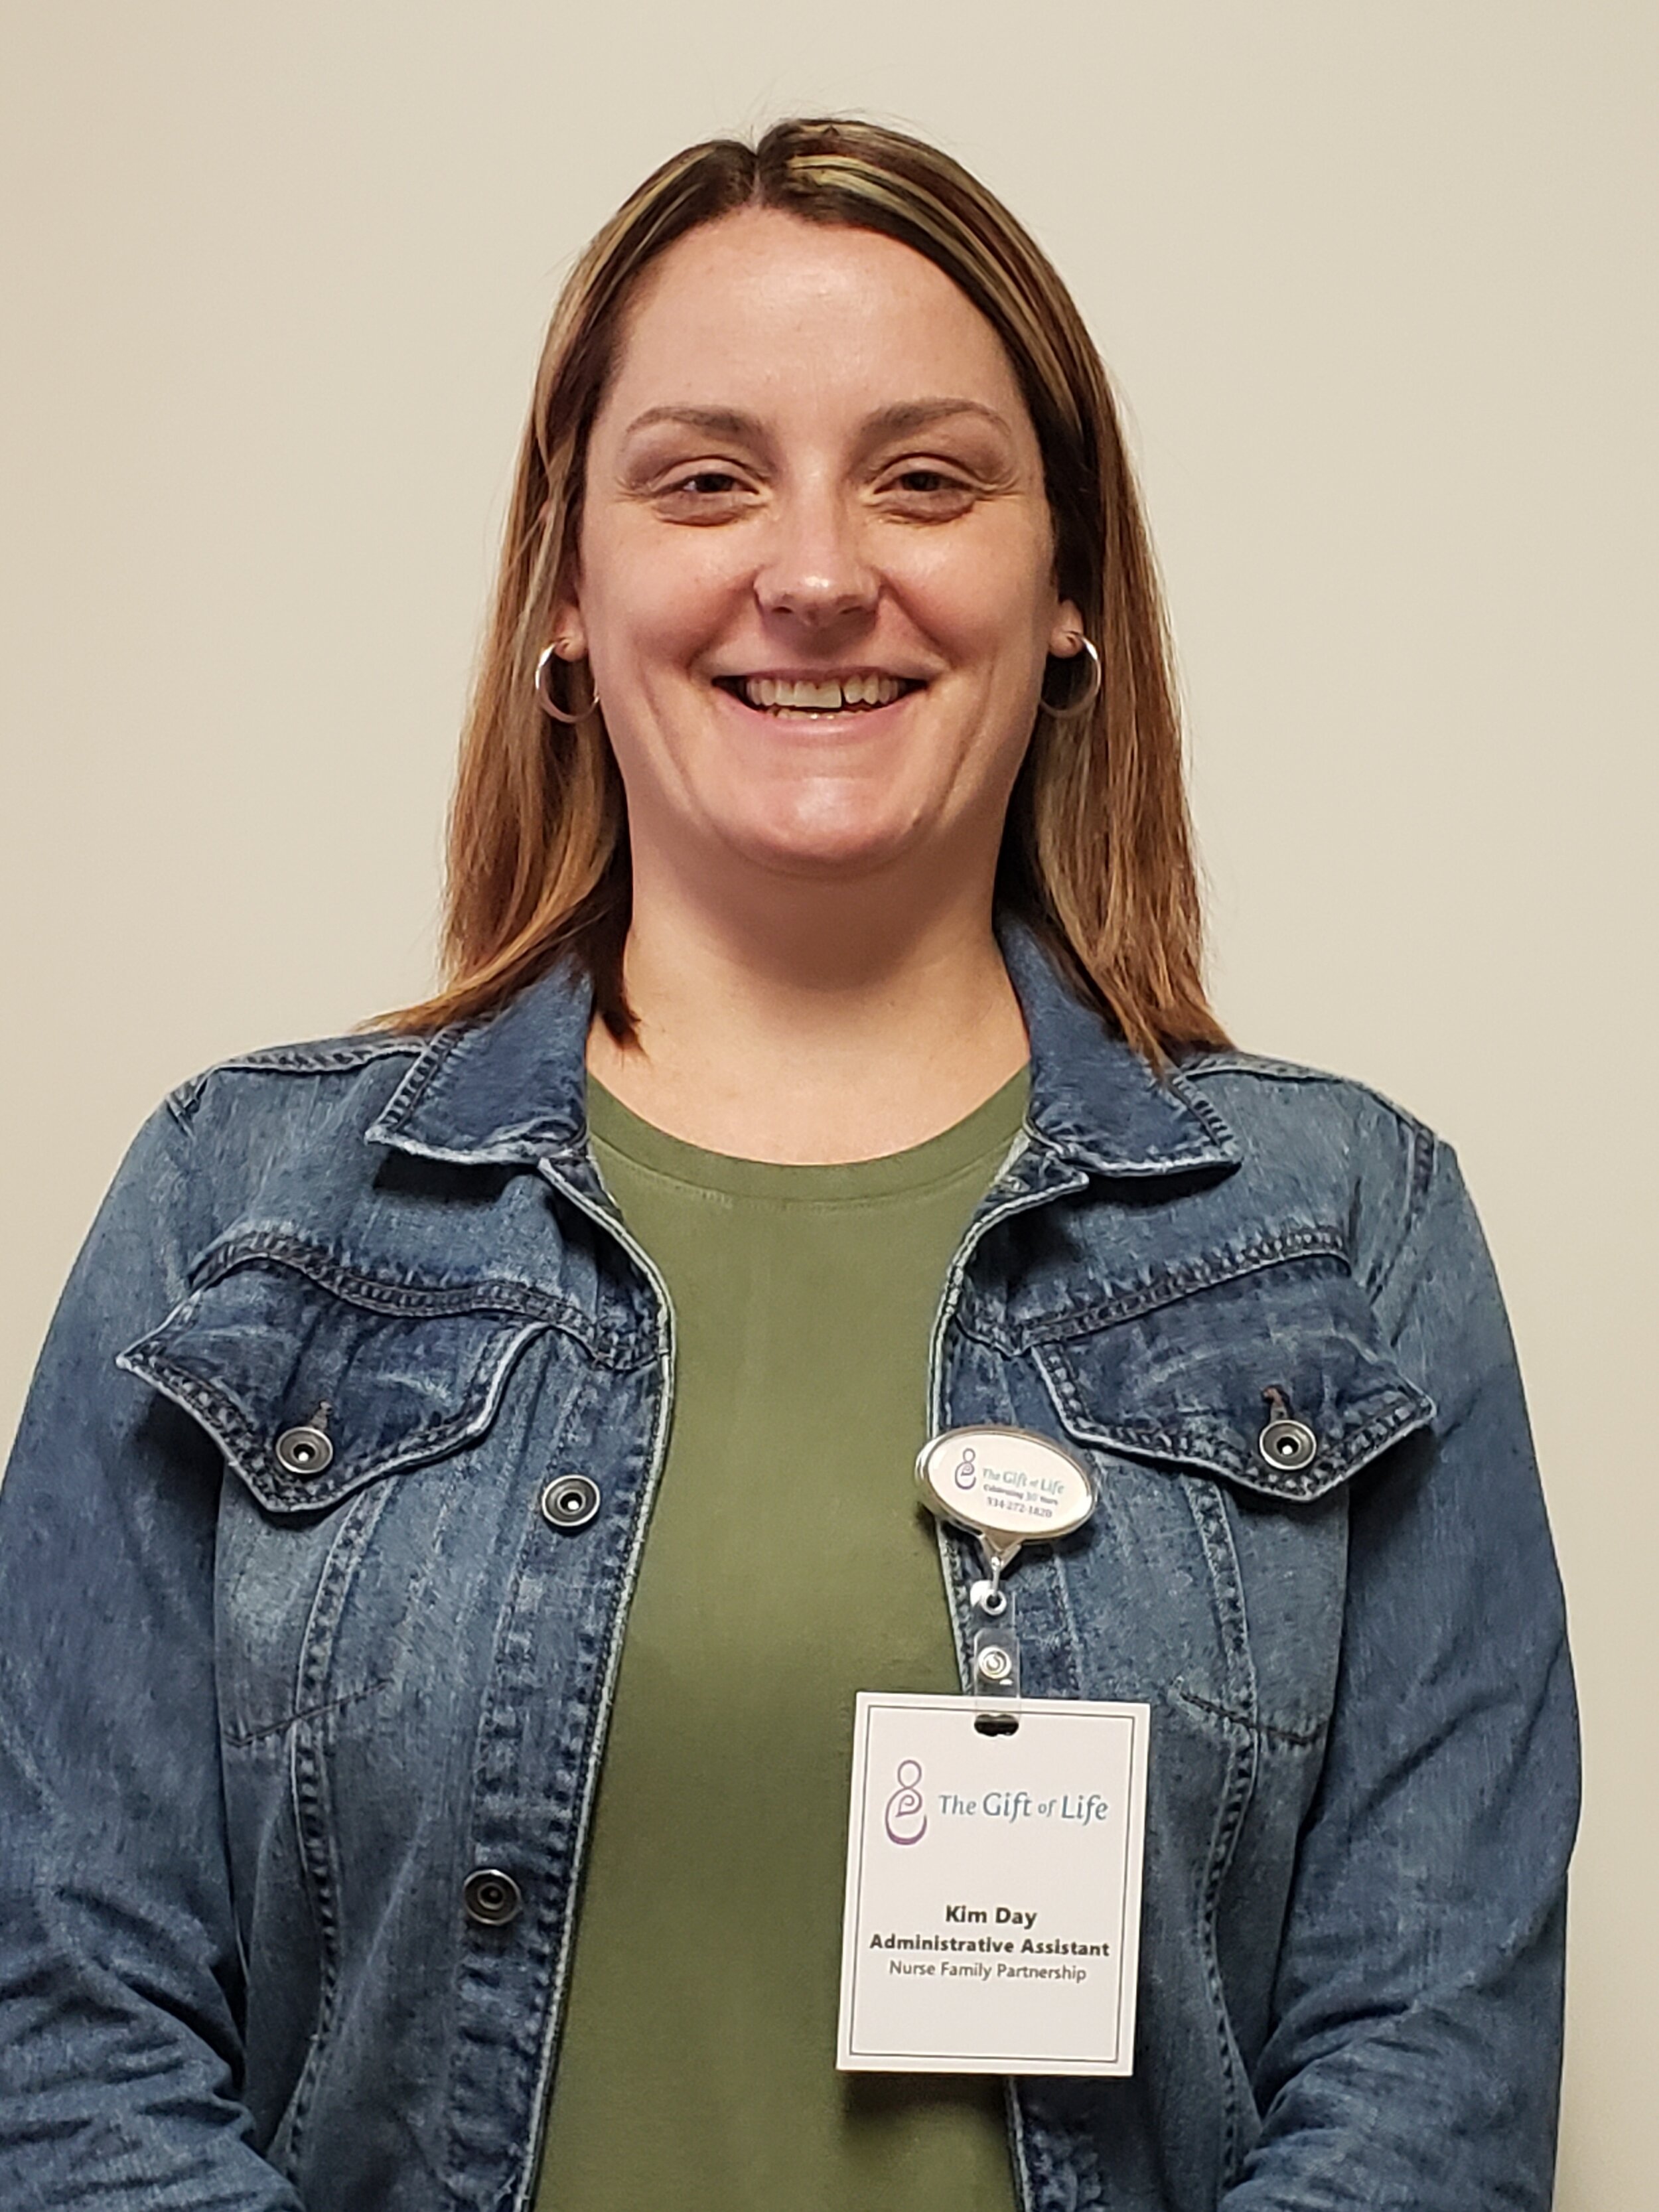 Kym Daly, Administrative Assistant